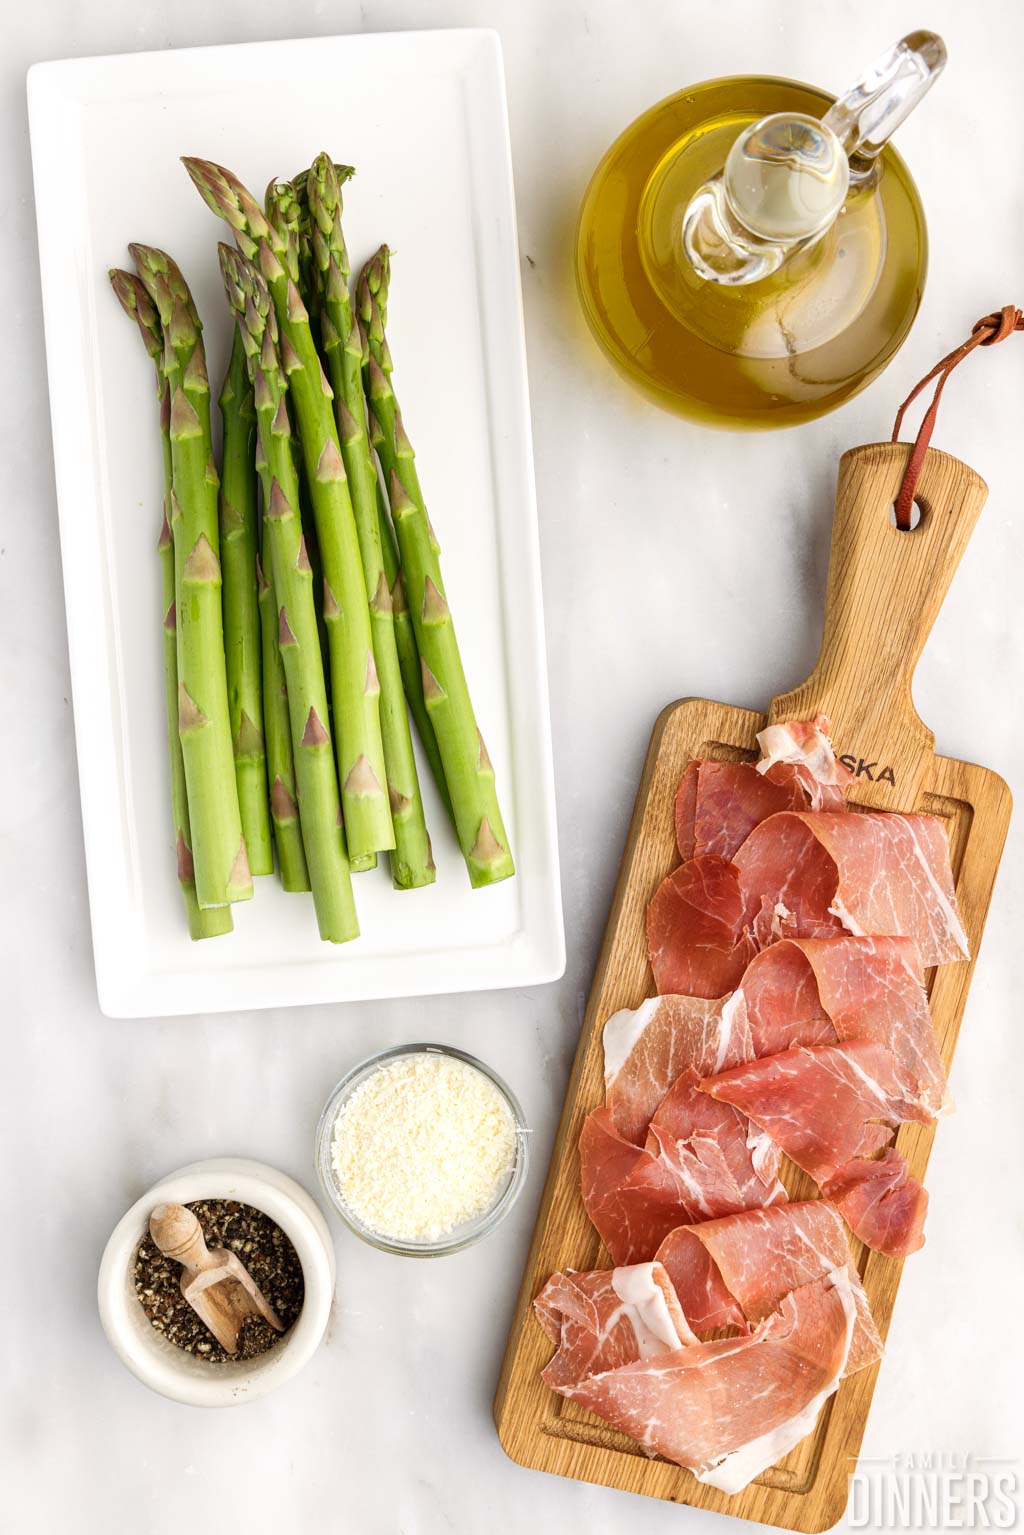 cut pieces of prosciutto next to plate of fresh asparagus